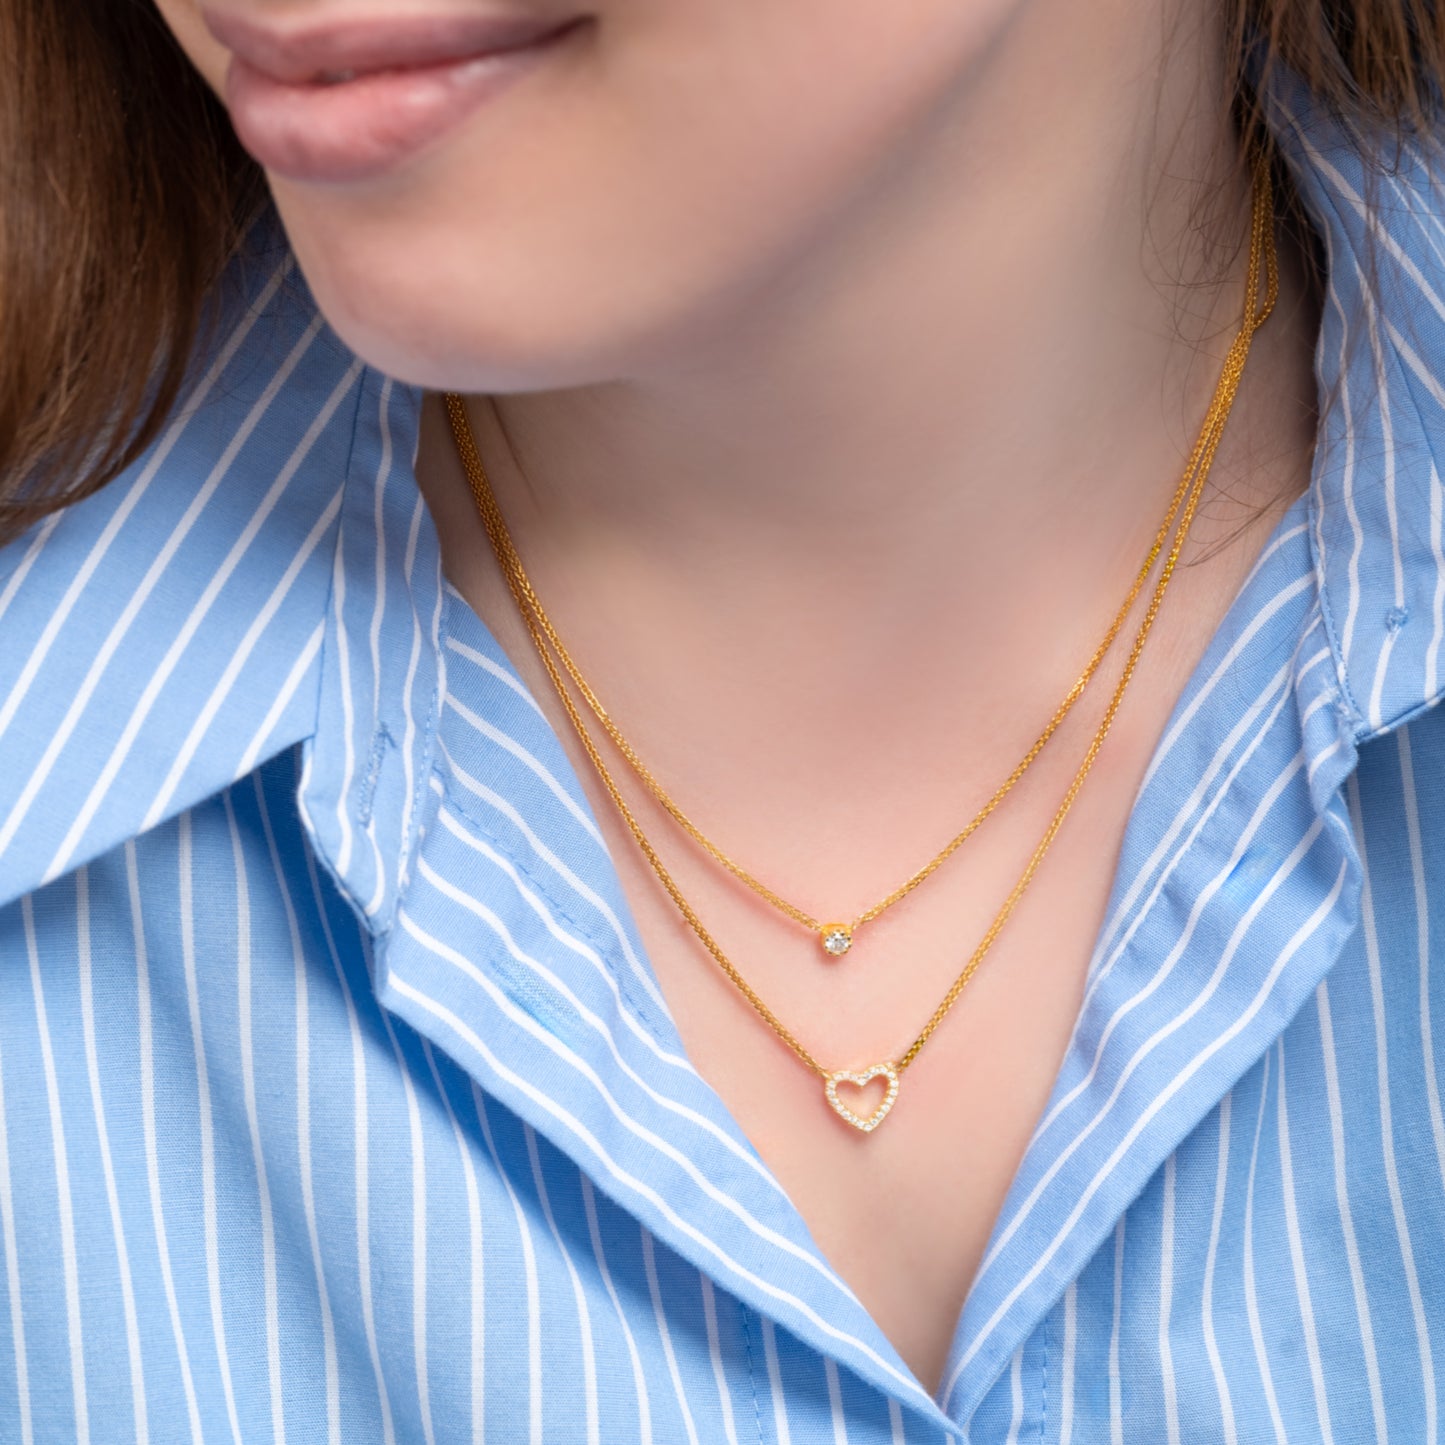 A model wearing Love Heart Gold Necklace